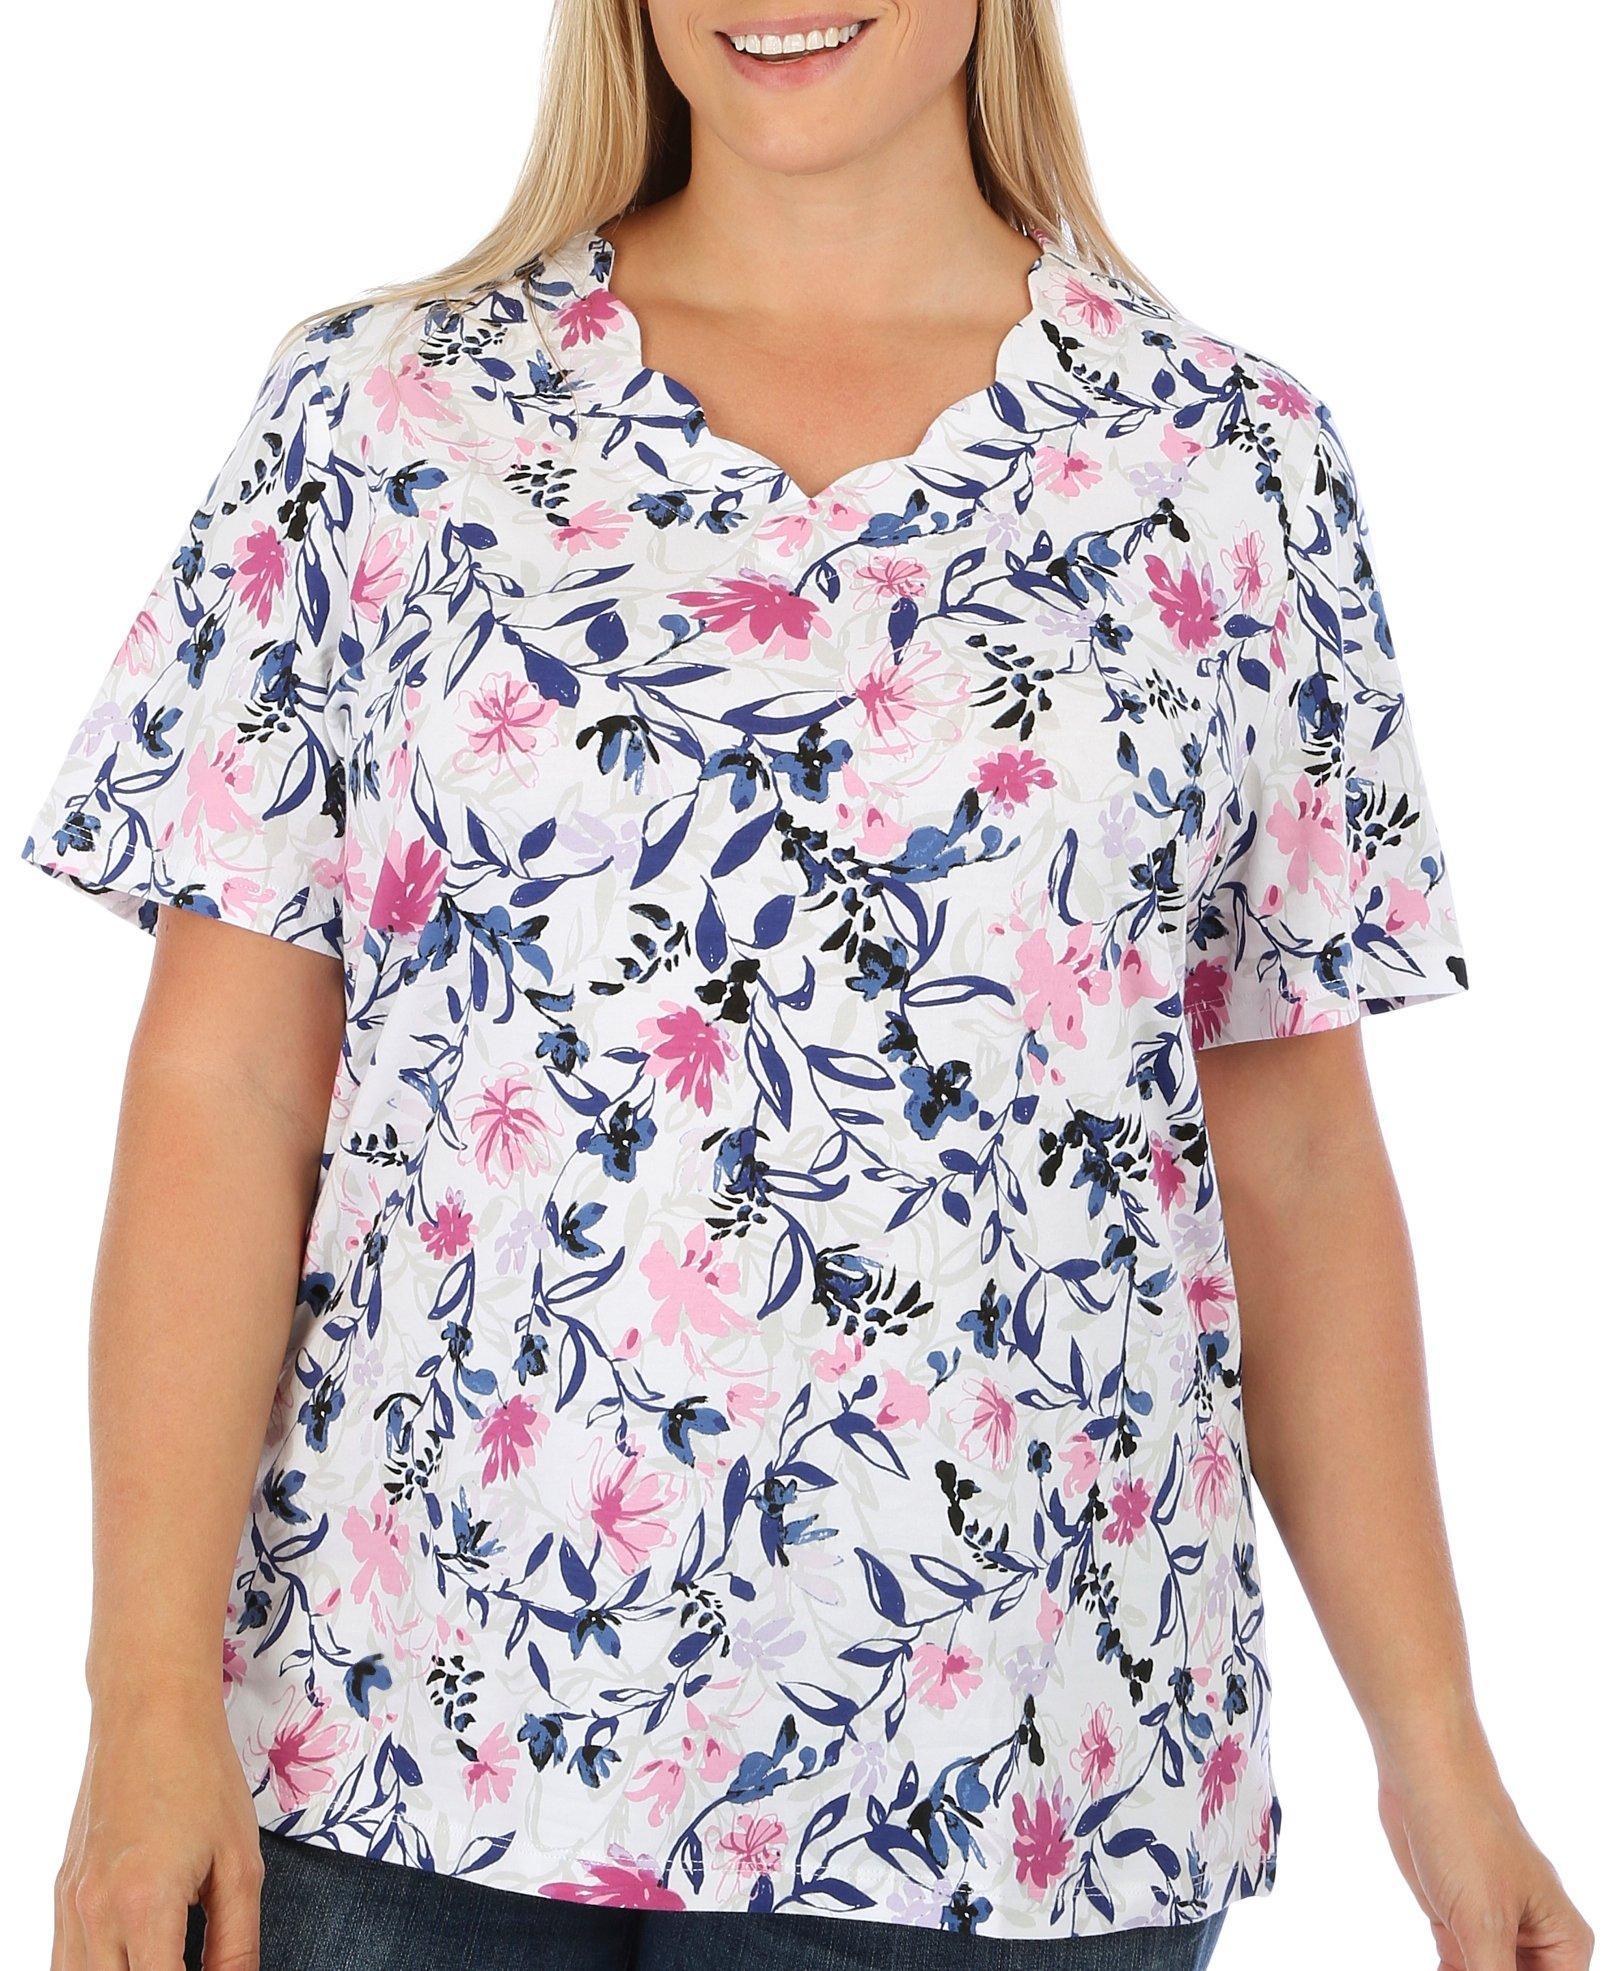 Coral Bay Plus Floral Print Scalloped Edge Top